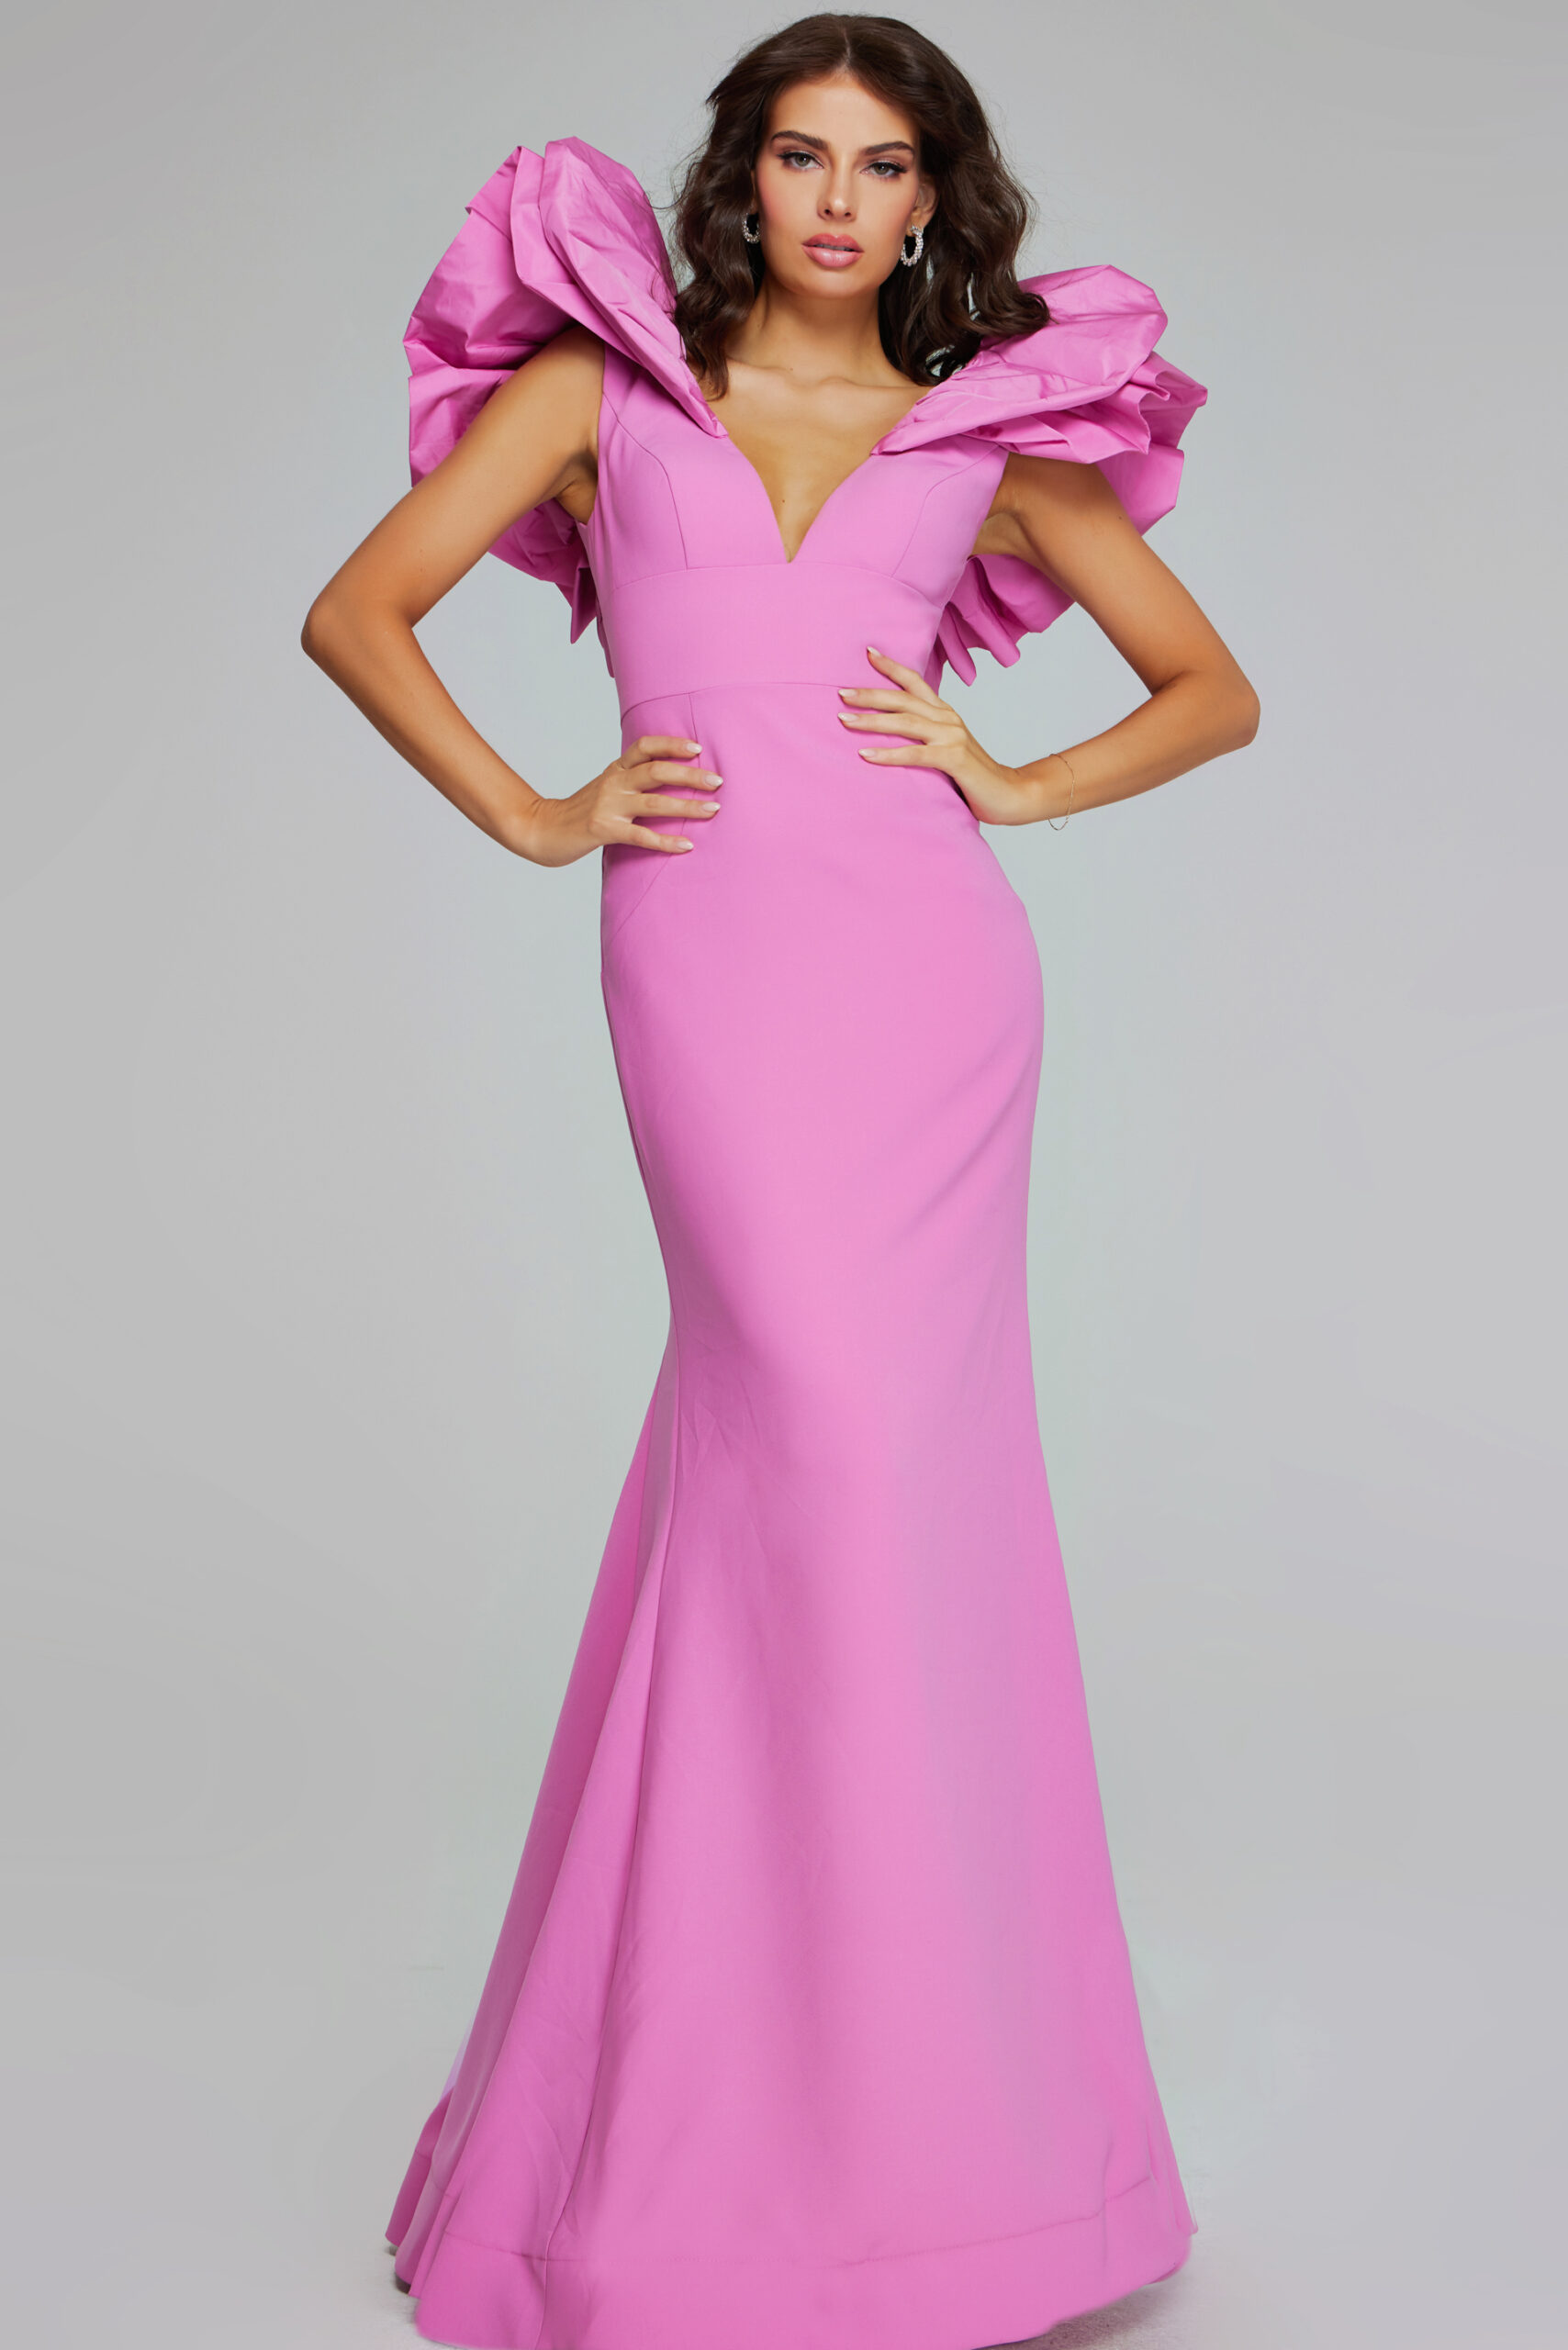 Bold Rose Pink Gown with Dramatic Ruffled Shoulders 40663